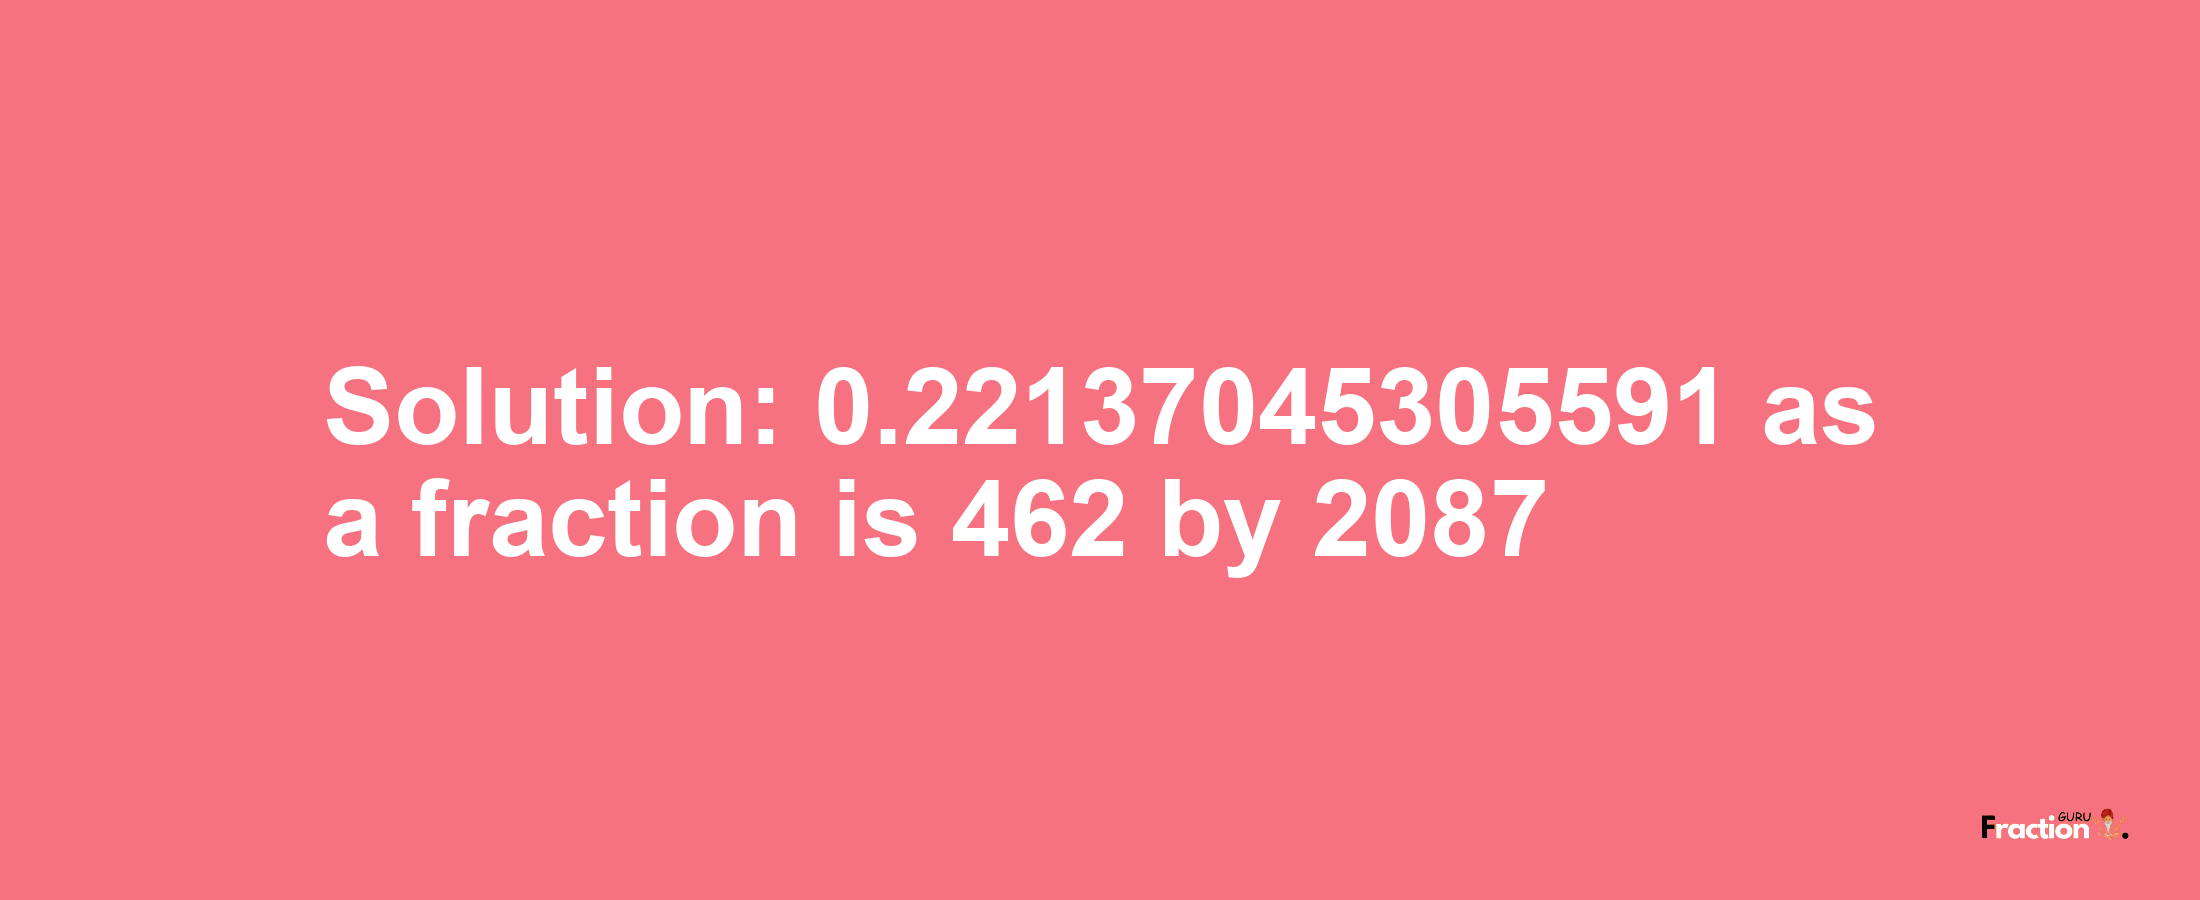 Solution:0.22137045305591 as a fraction is 462/2087